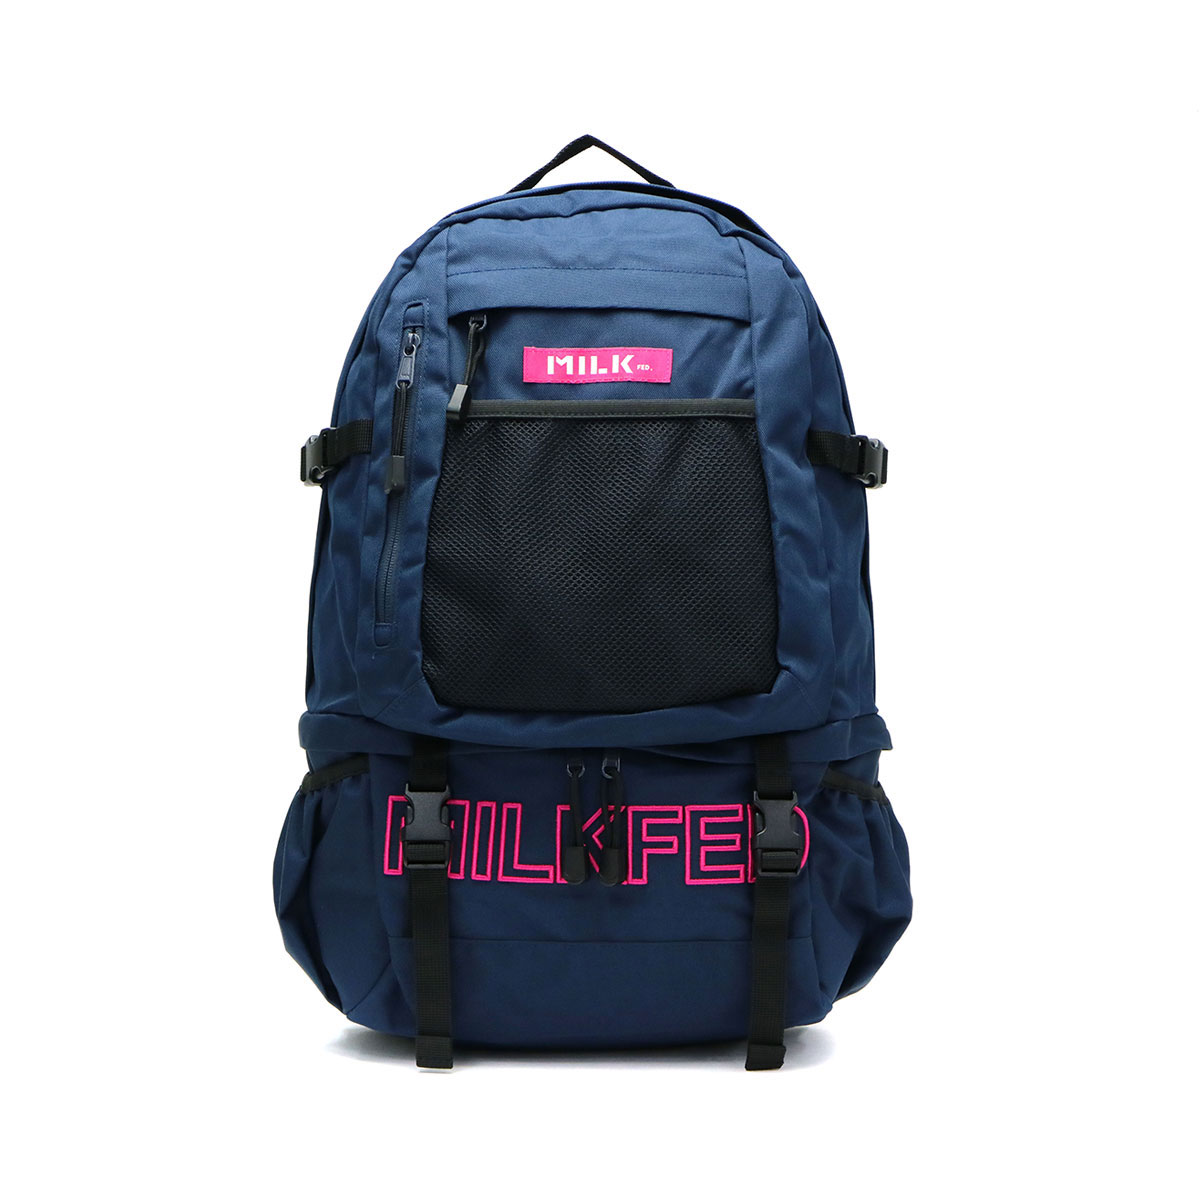 MILKFED. ミルクフェド EMBROIDERY BIG BACKPACK BAR バックパック 23L ...